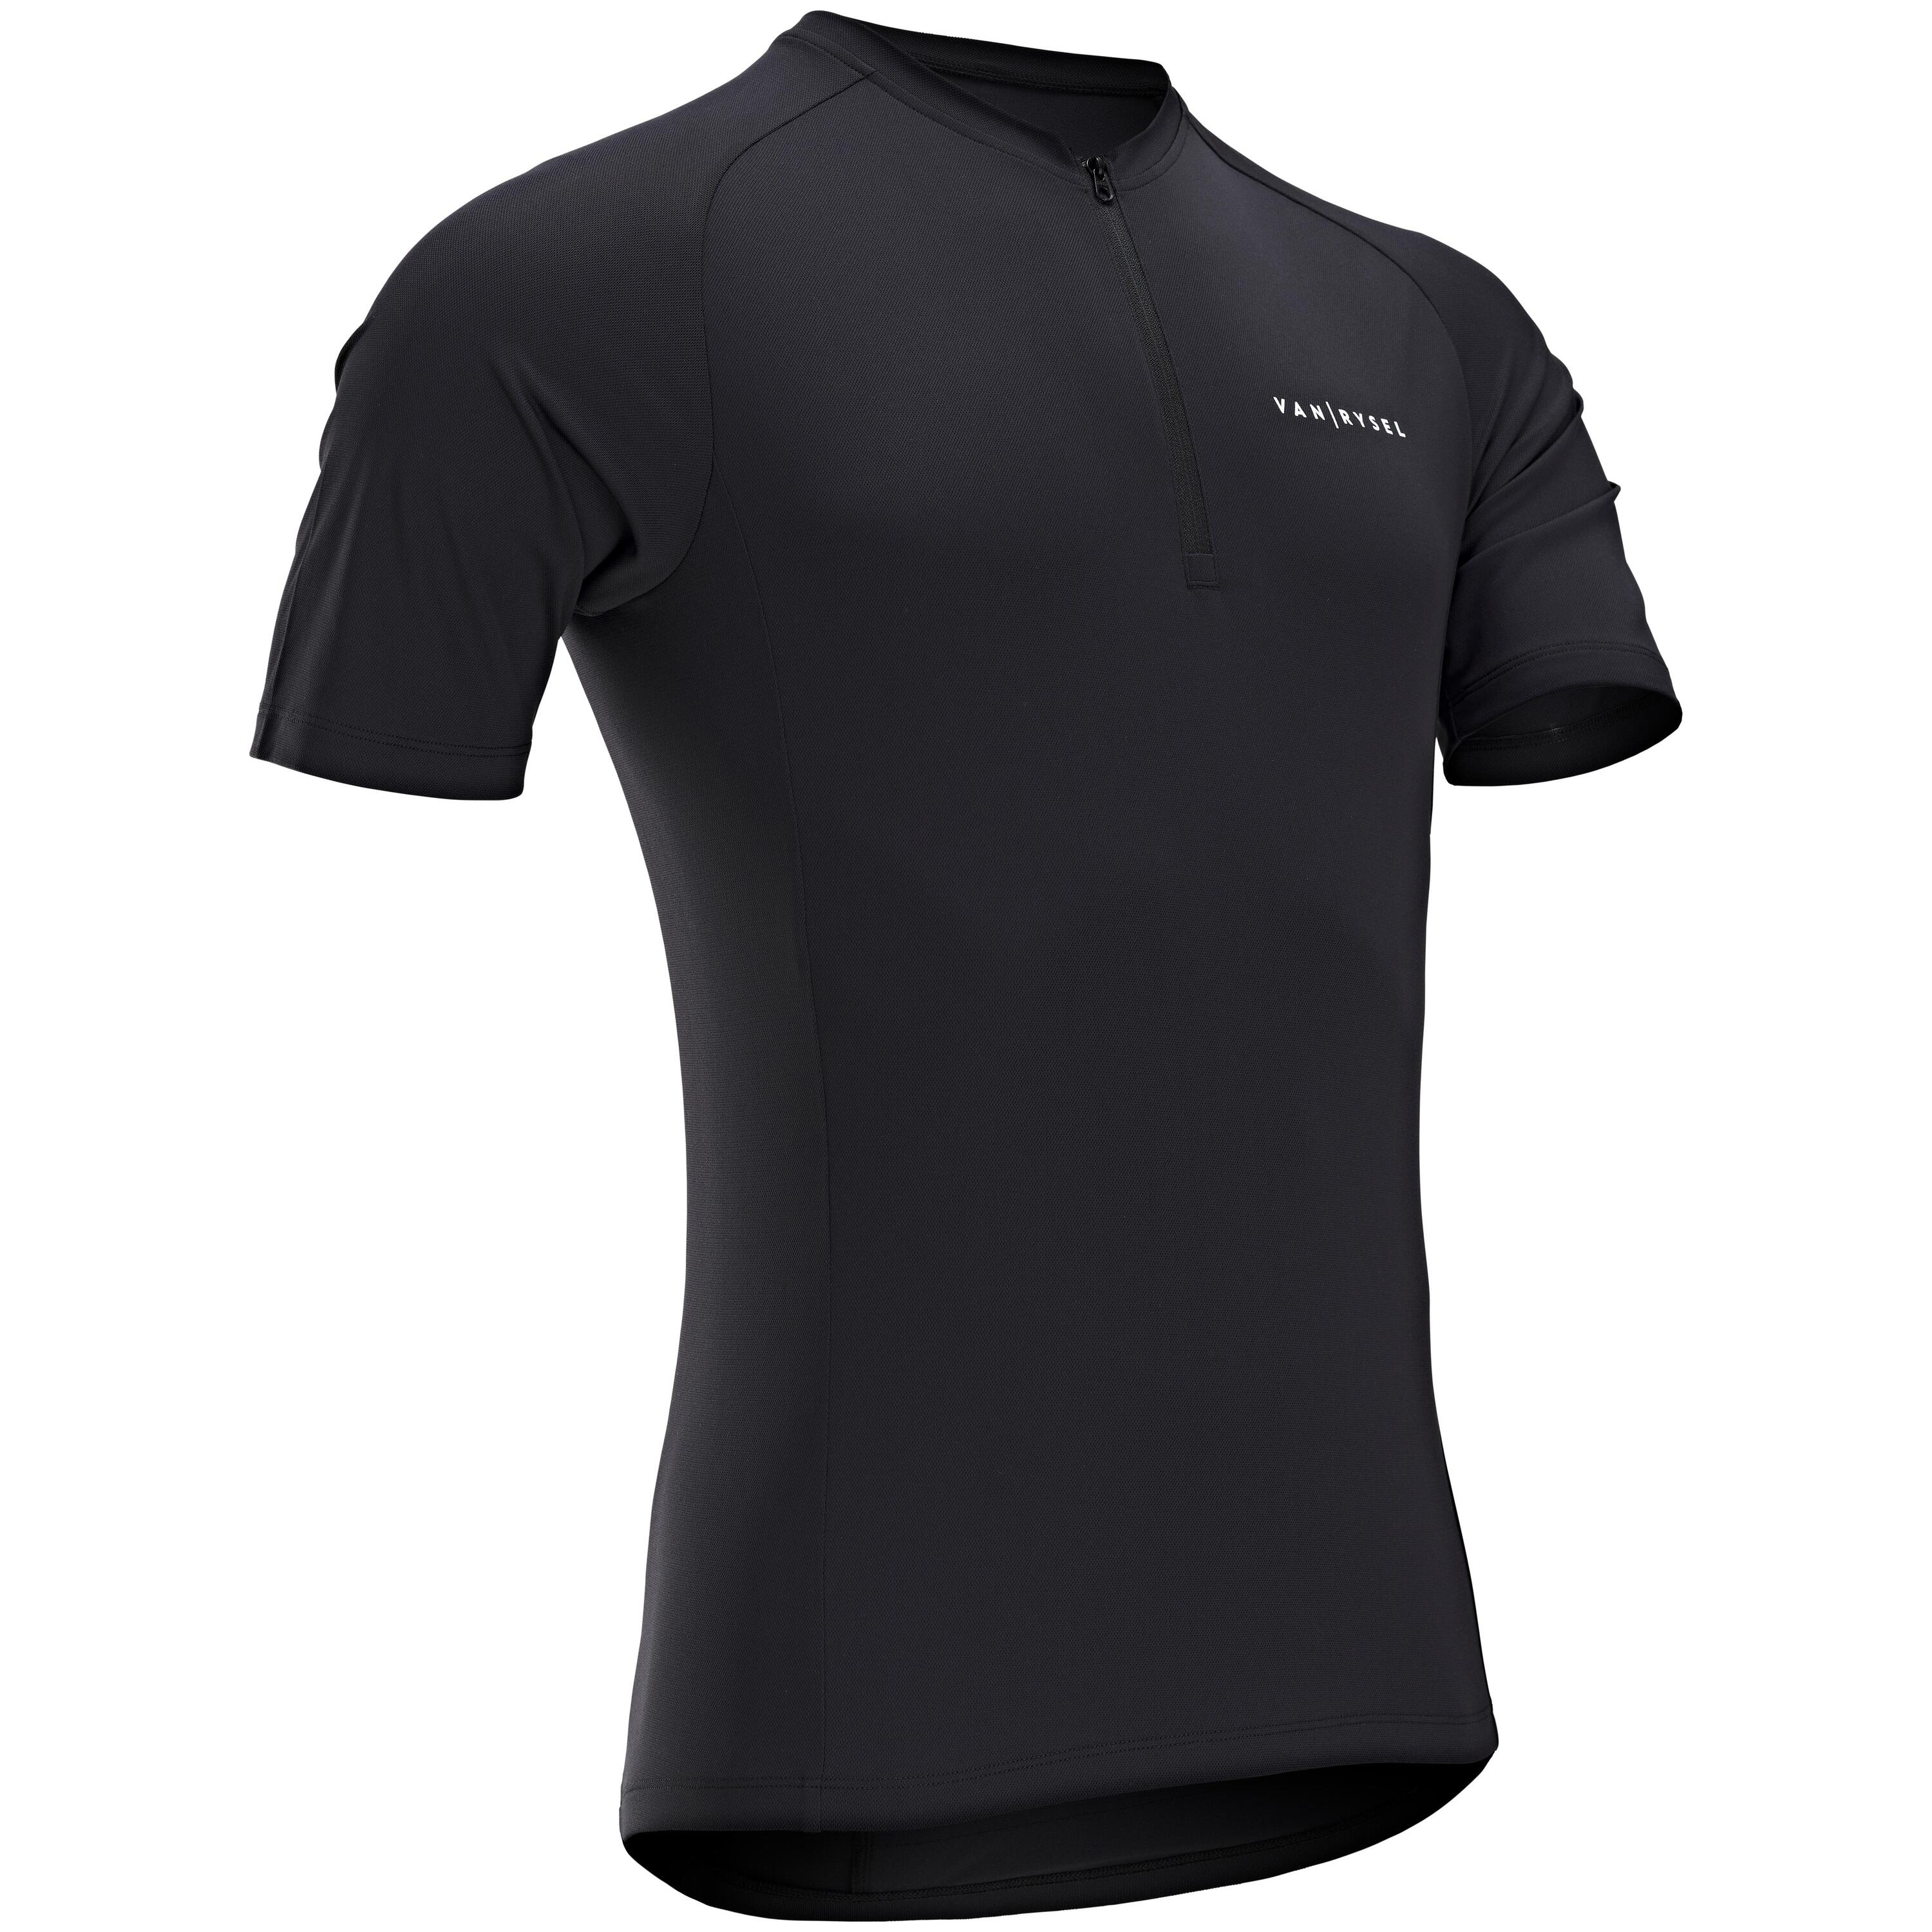 Men's Road Cycling Short-Sleeved Summer Jersey Essential - Black 2/7